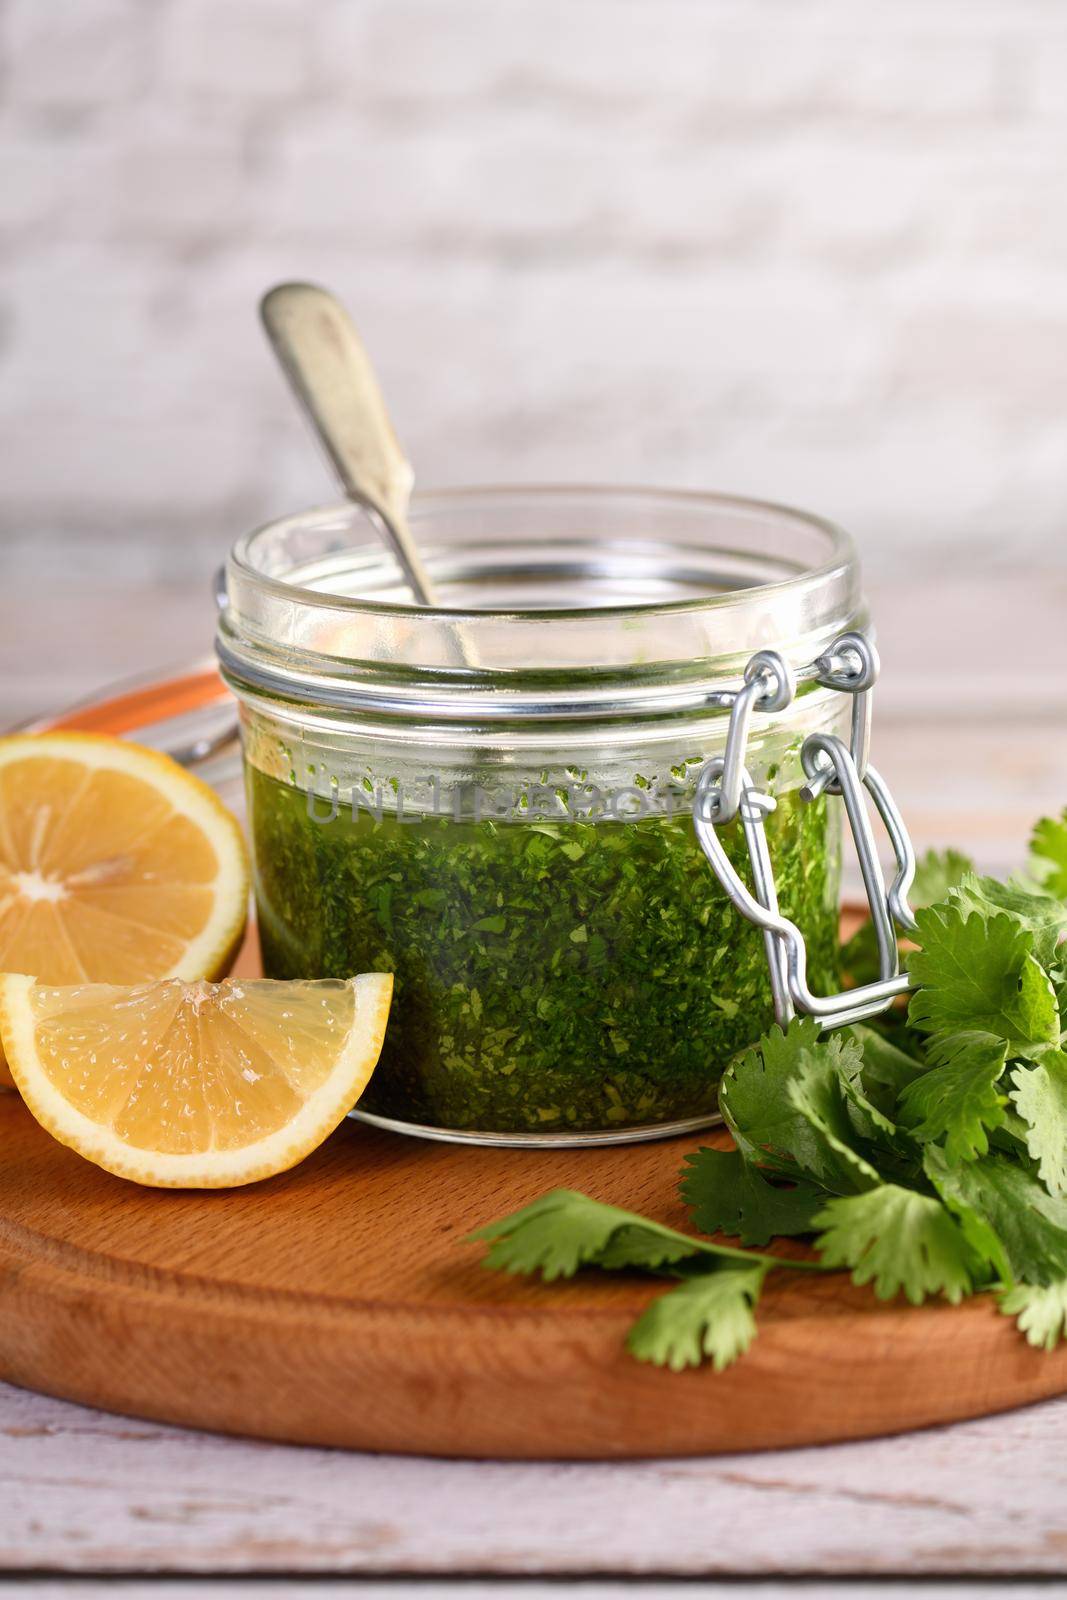 Green sauce, cilantro seasoning for salad dressing by Apolonia